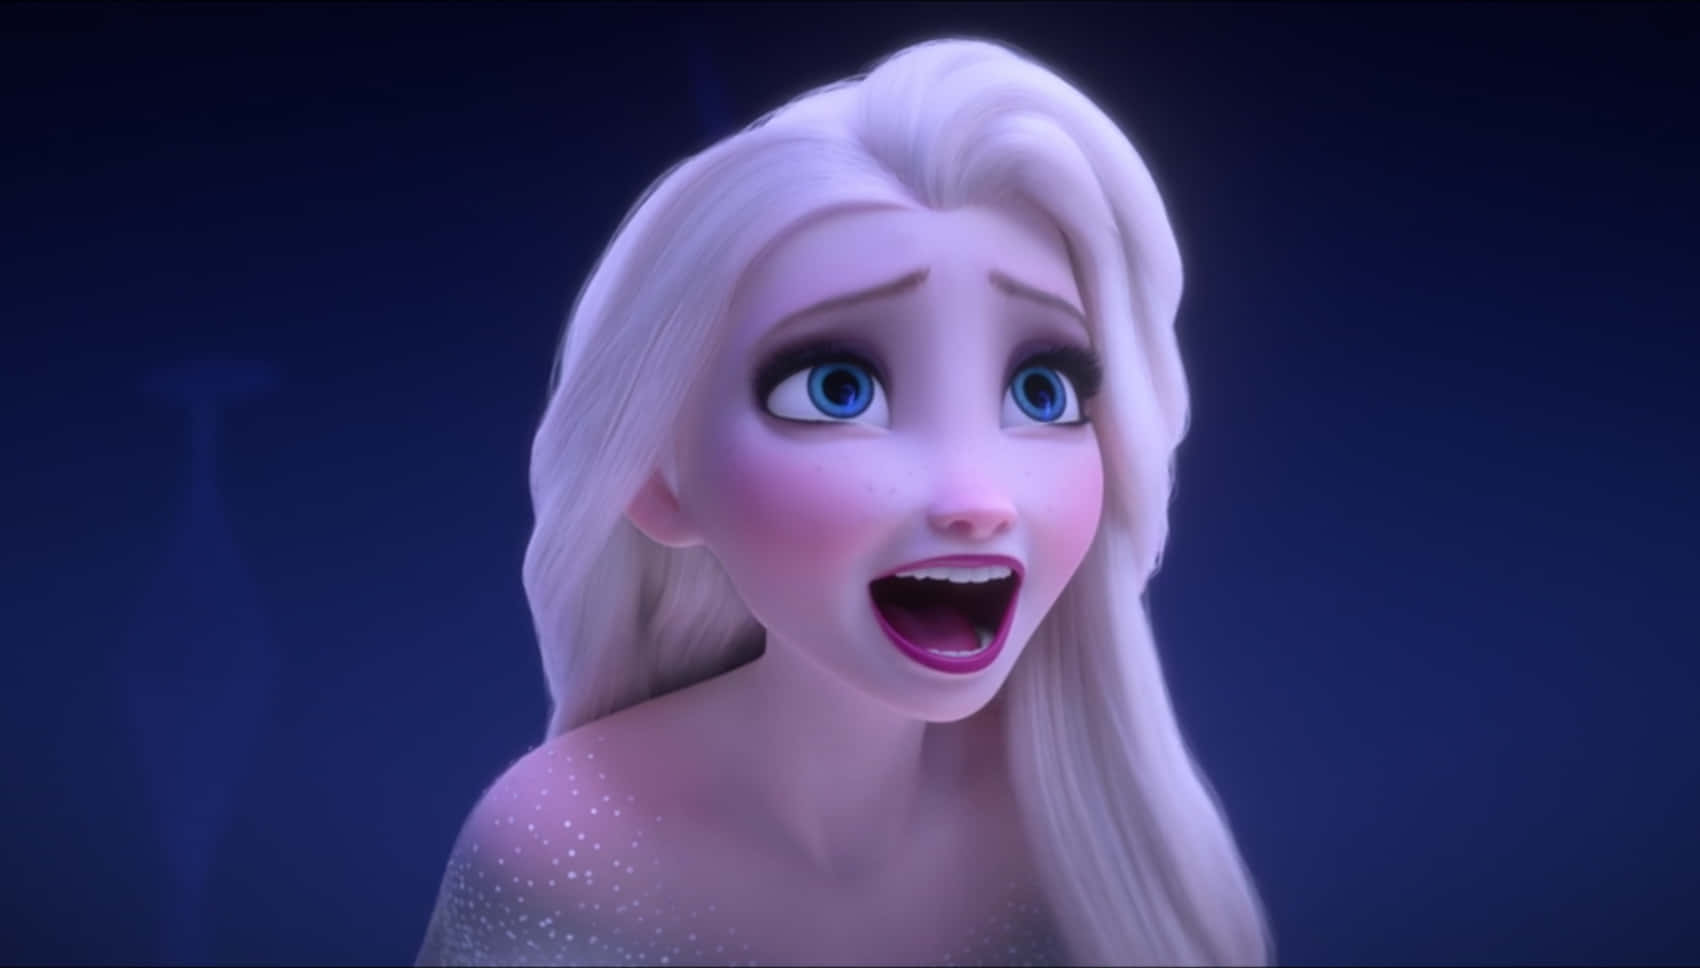 "elsa Looks Up At The Night Sky, Wishing For A Better Future."